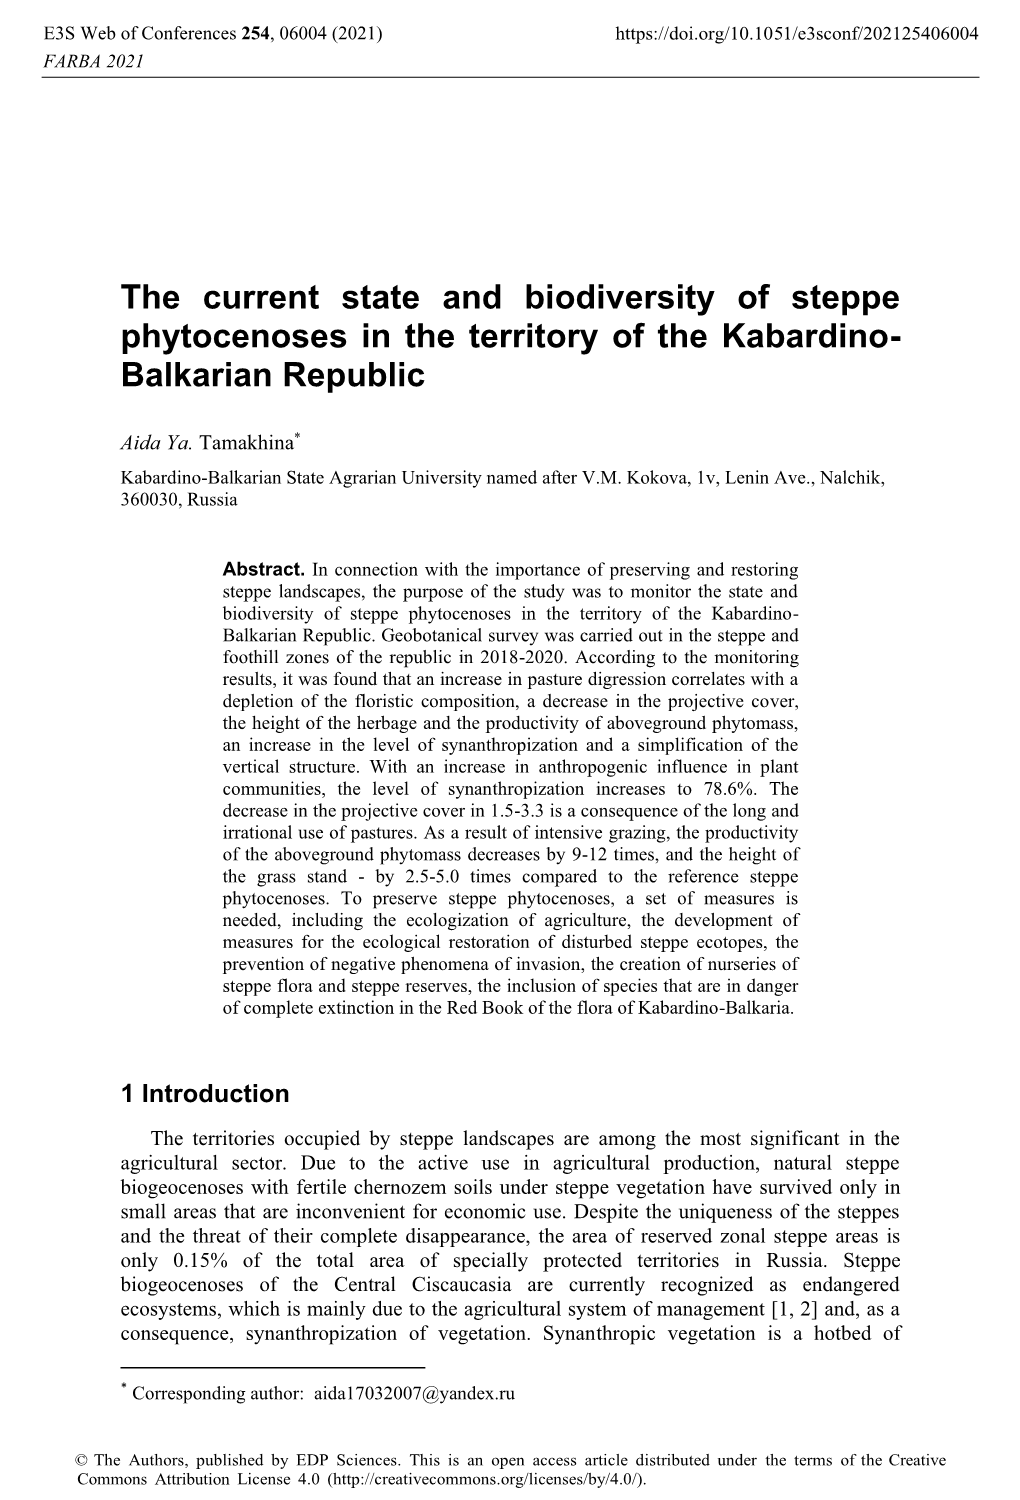 The Current State and Biodiversity of Steppe Phytocenoses in the Territory of the Kabardino- Balkarian Republic